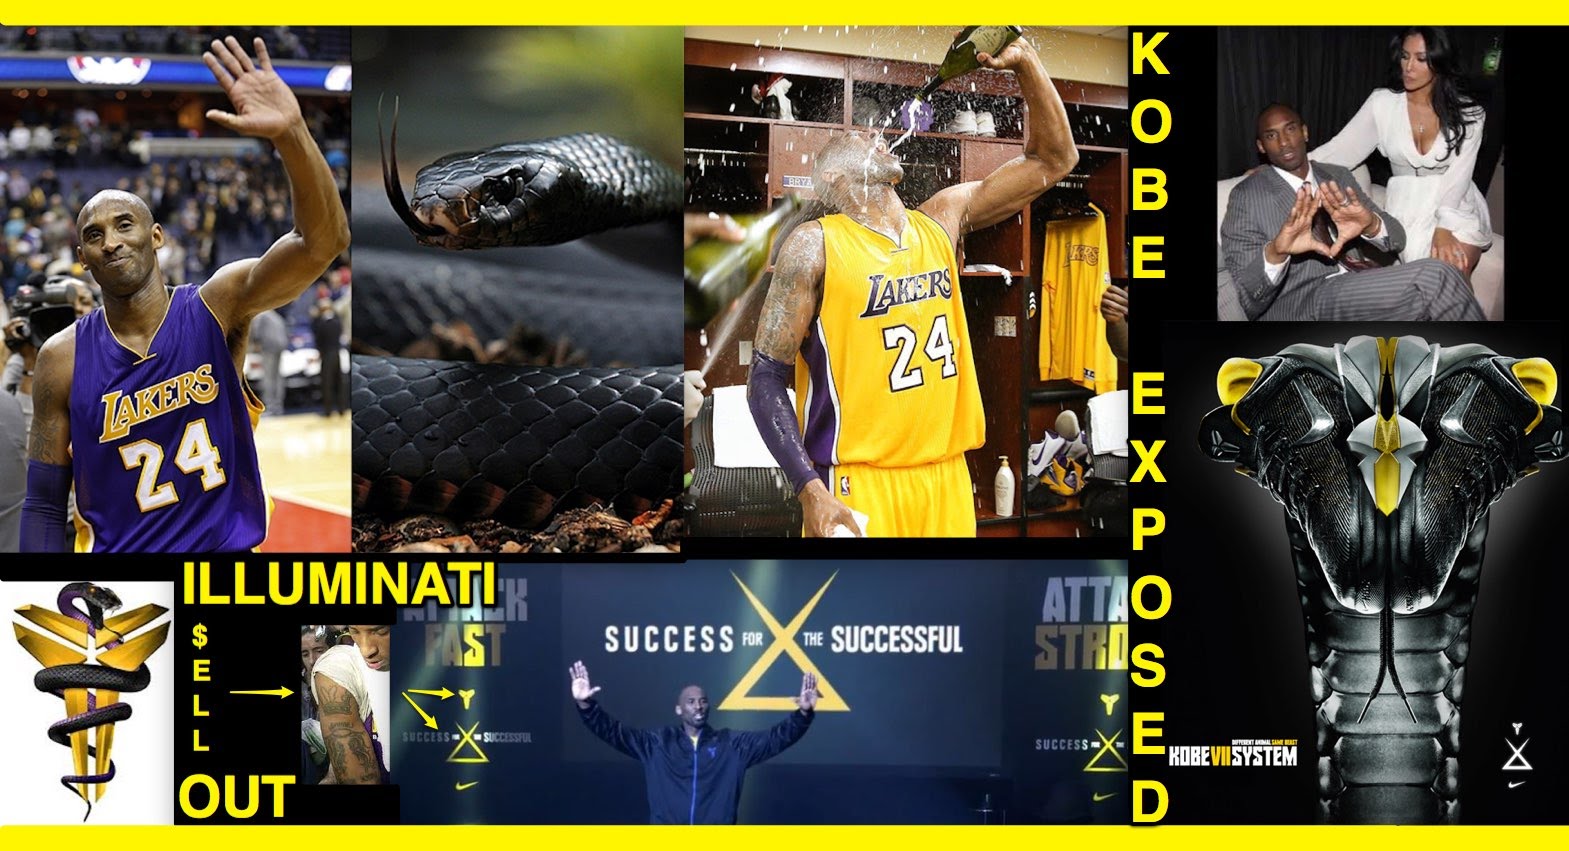 KOBE BRYANT RETIRES AS A ILLUMINATI SELL OUT *MUST SEE!*